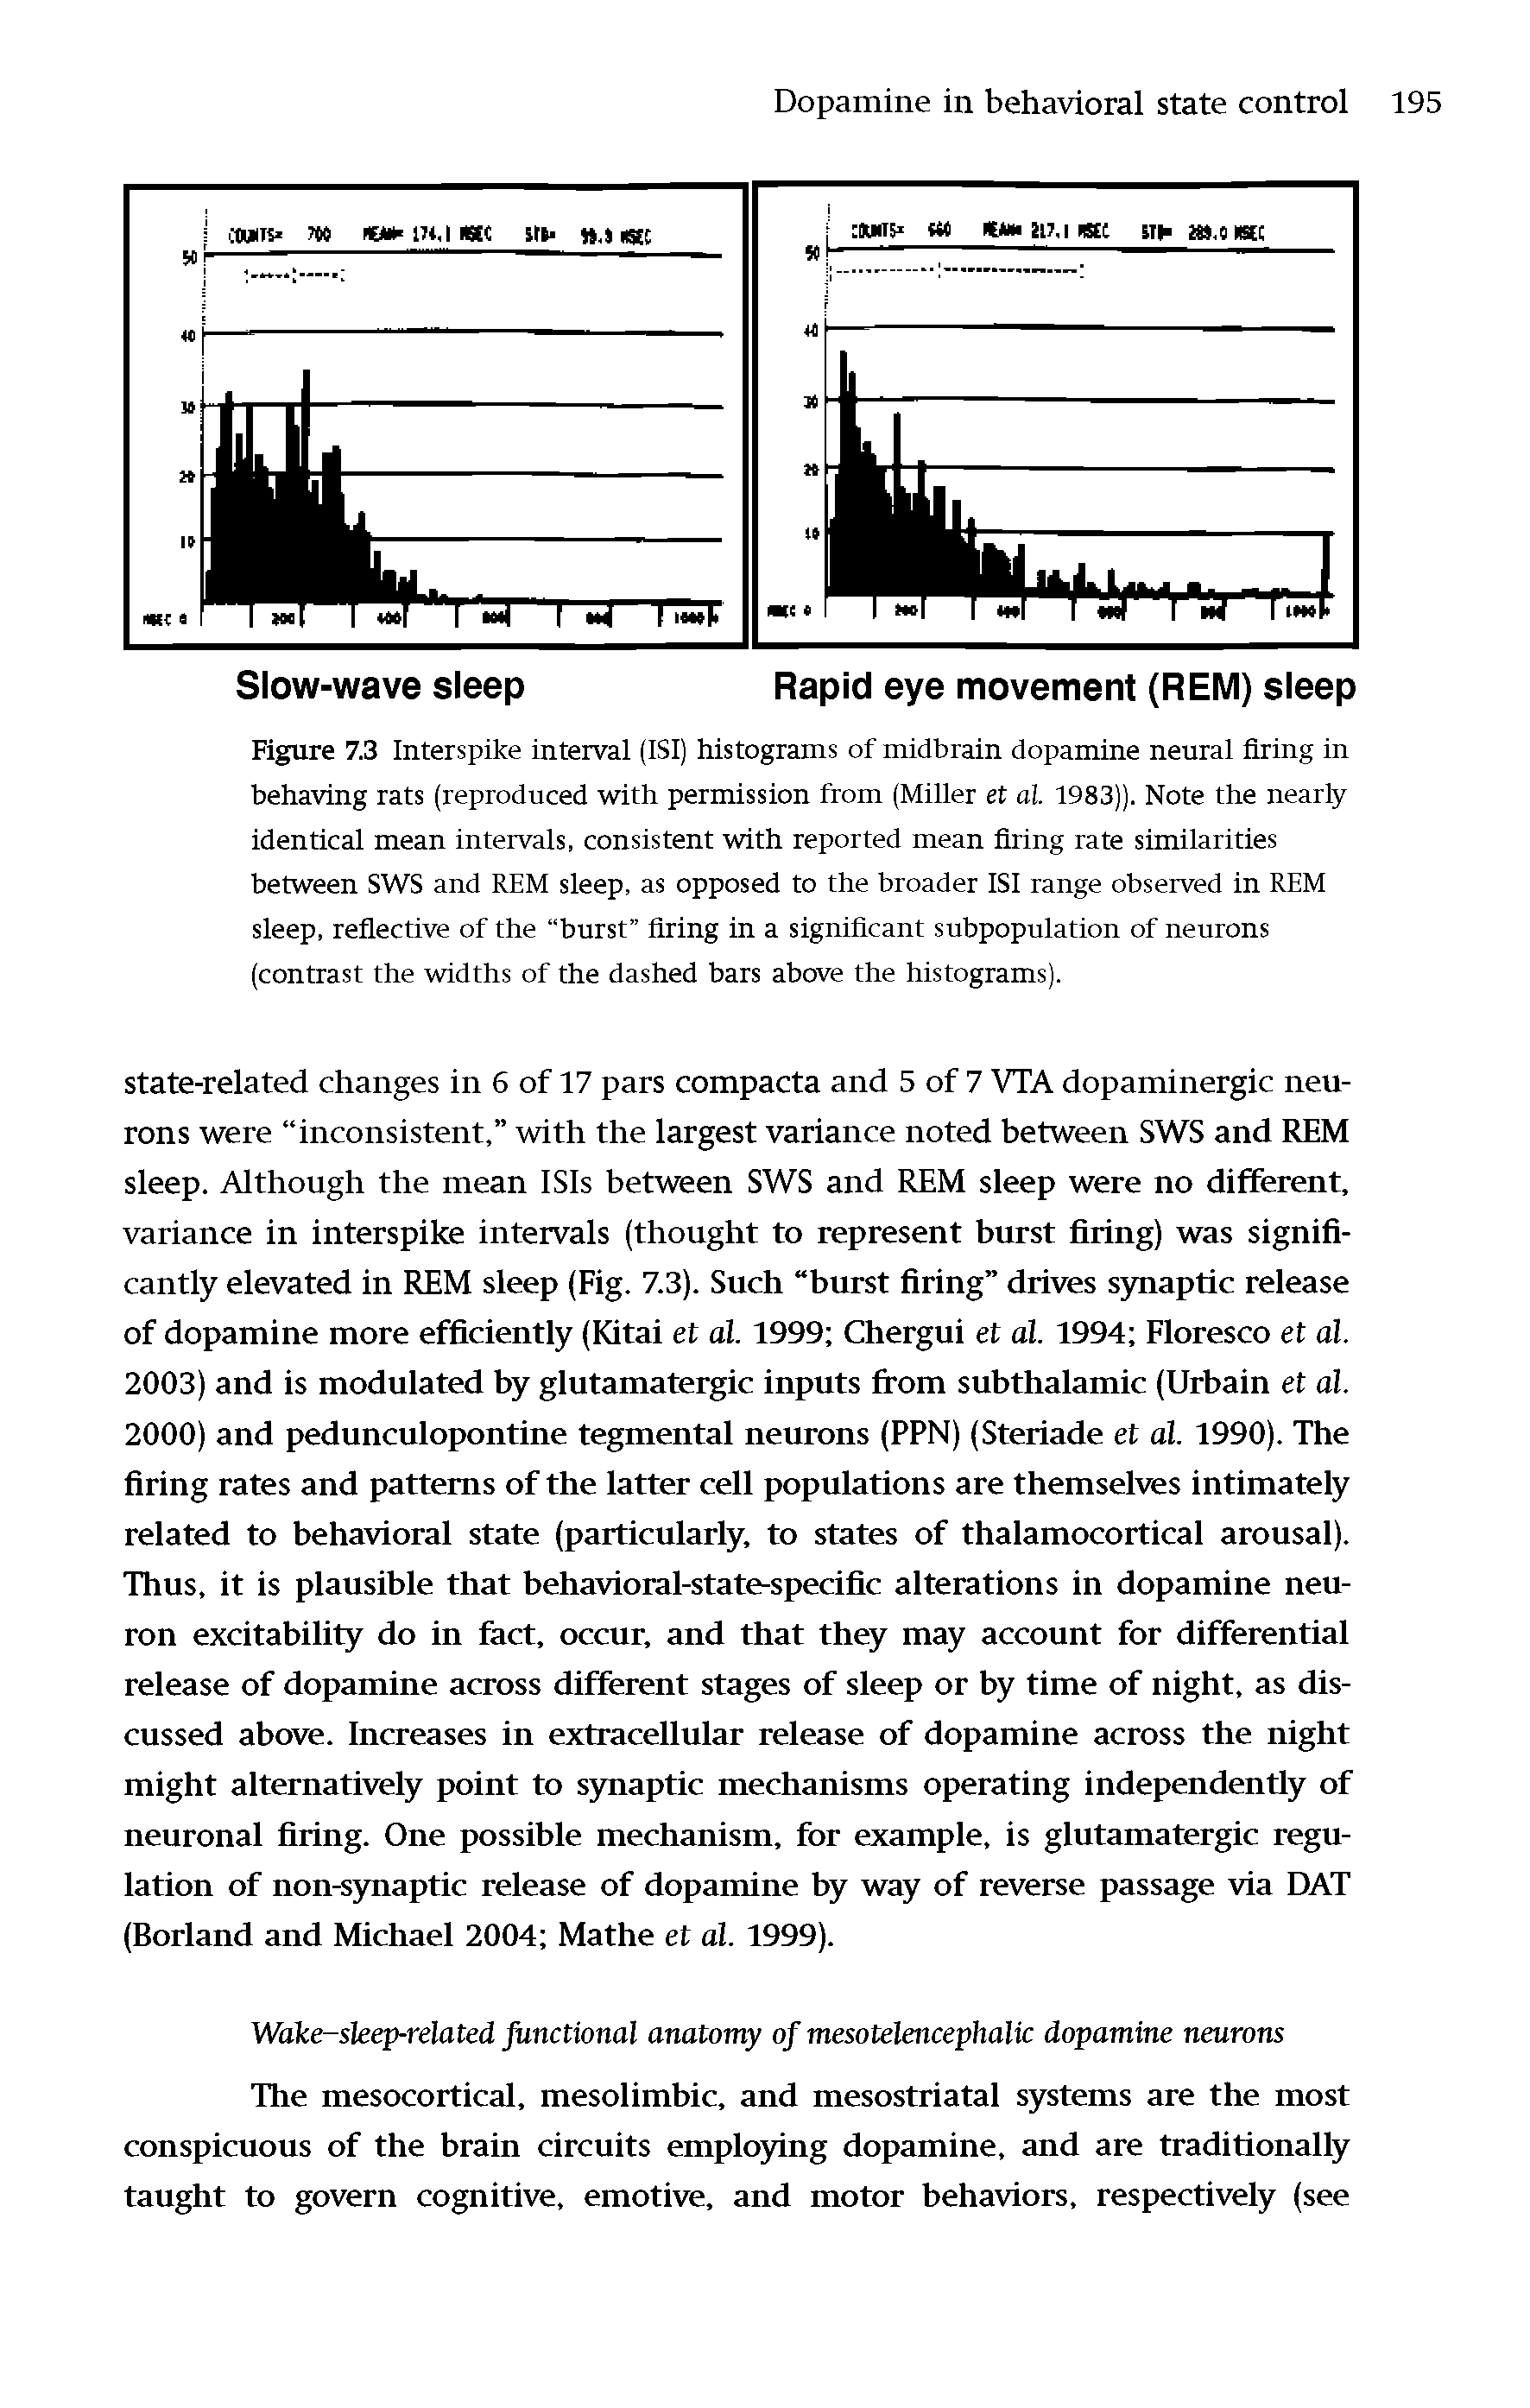 Figure 7.3 Interspike interval (ISI) histograms of midbrain dopamine neural firing in behaving rats (reproduced with permission from (Miller et al. 1983)). Note the nearly identical mean intervals, consistent with reported mean firing rate similarities between SWS and REM sleep, as opposed to the broader ISI range observed in REM sleep, reflective of the burst firing in a significant subpopulation of neurons (contrast the widths of the dashed bars above the histograms).